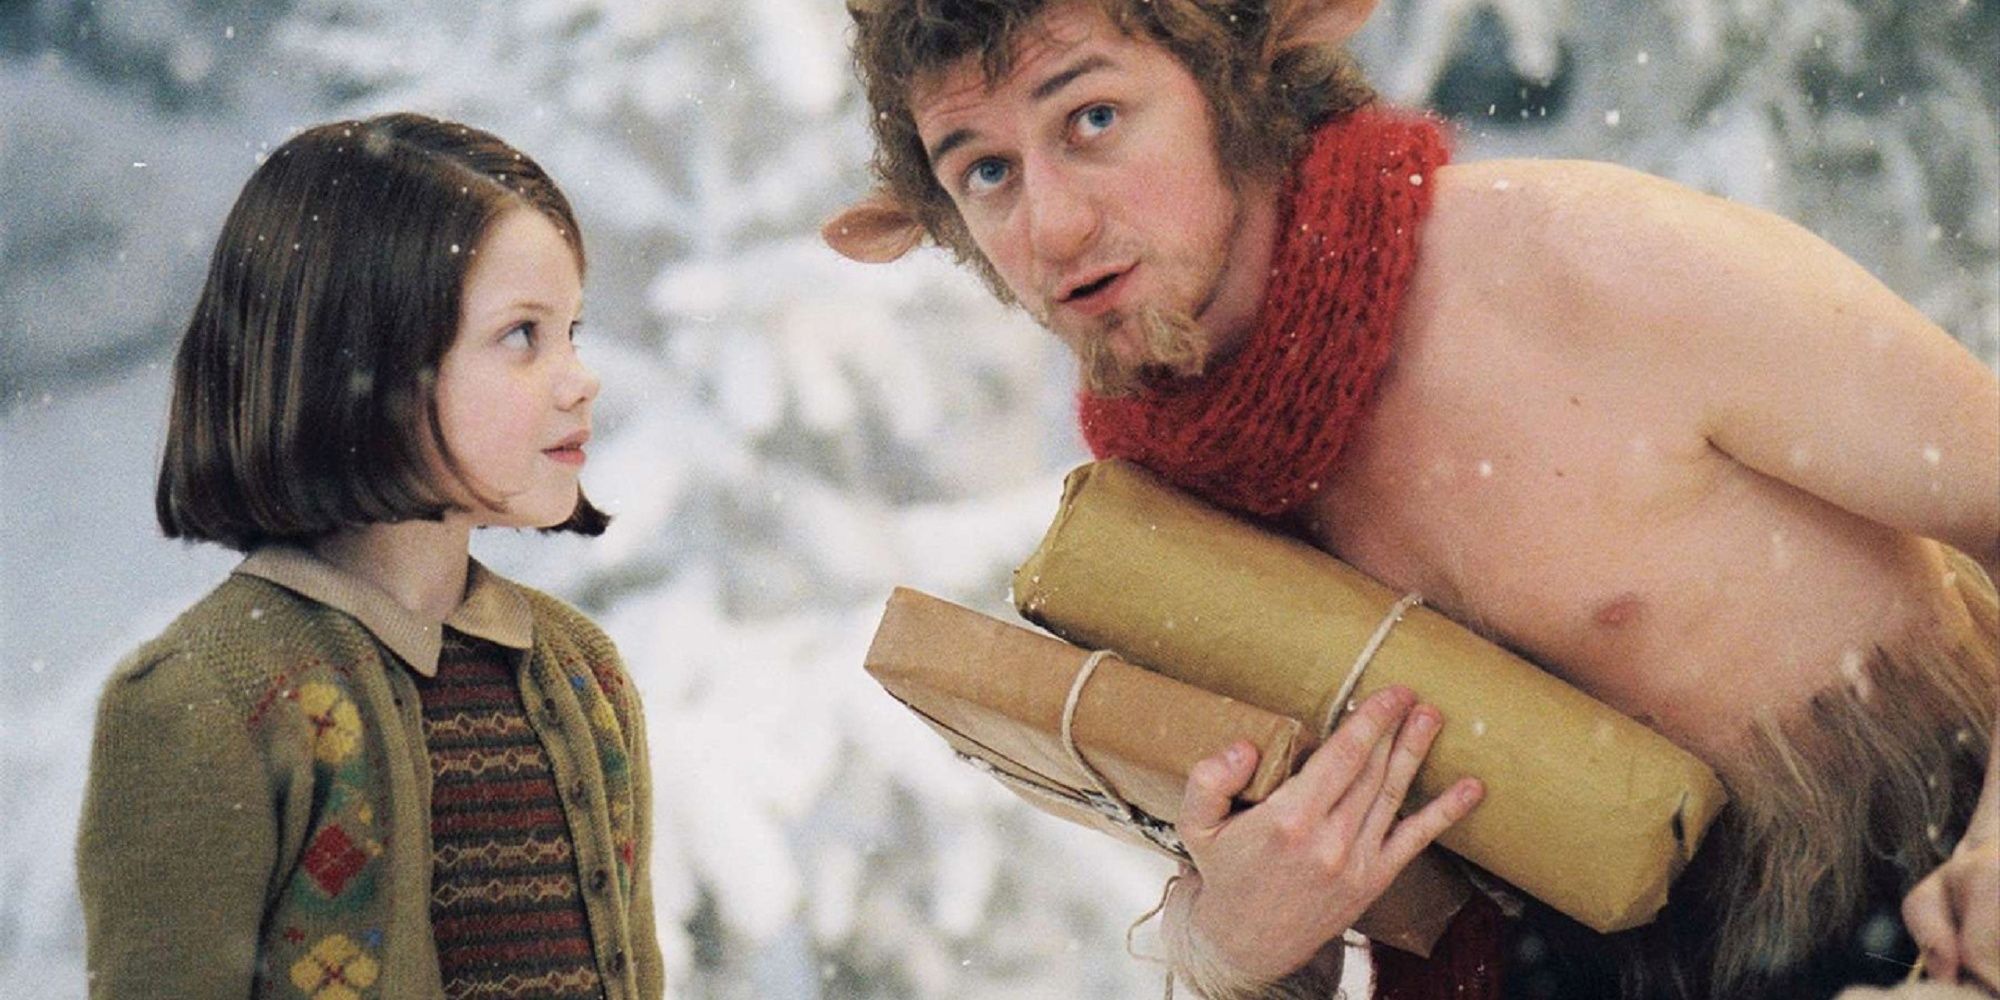 Mr. Tumnus and Lucy in the snow in The Chronicles of Narnia.